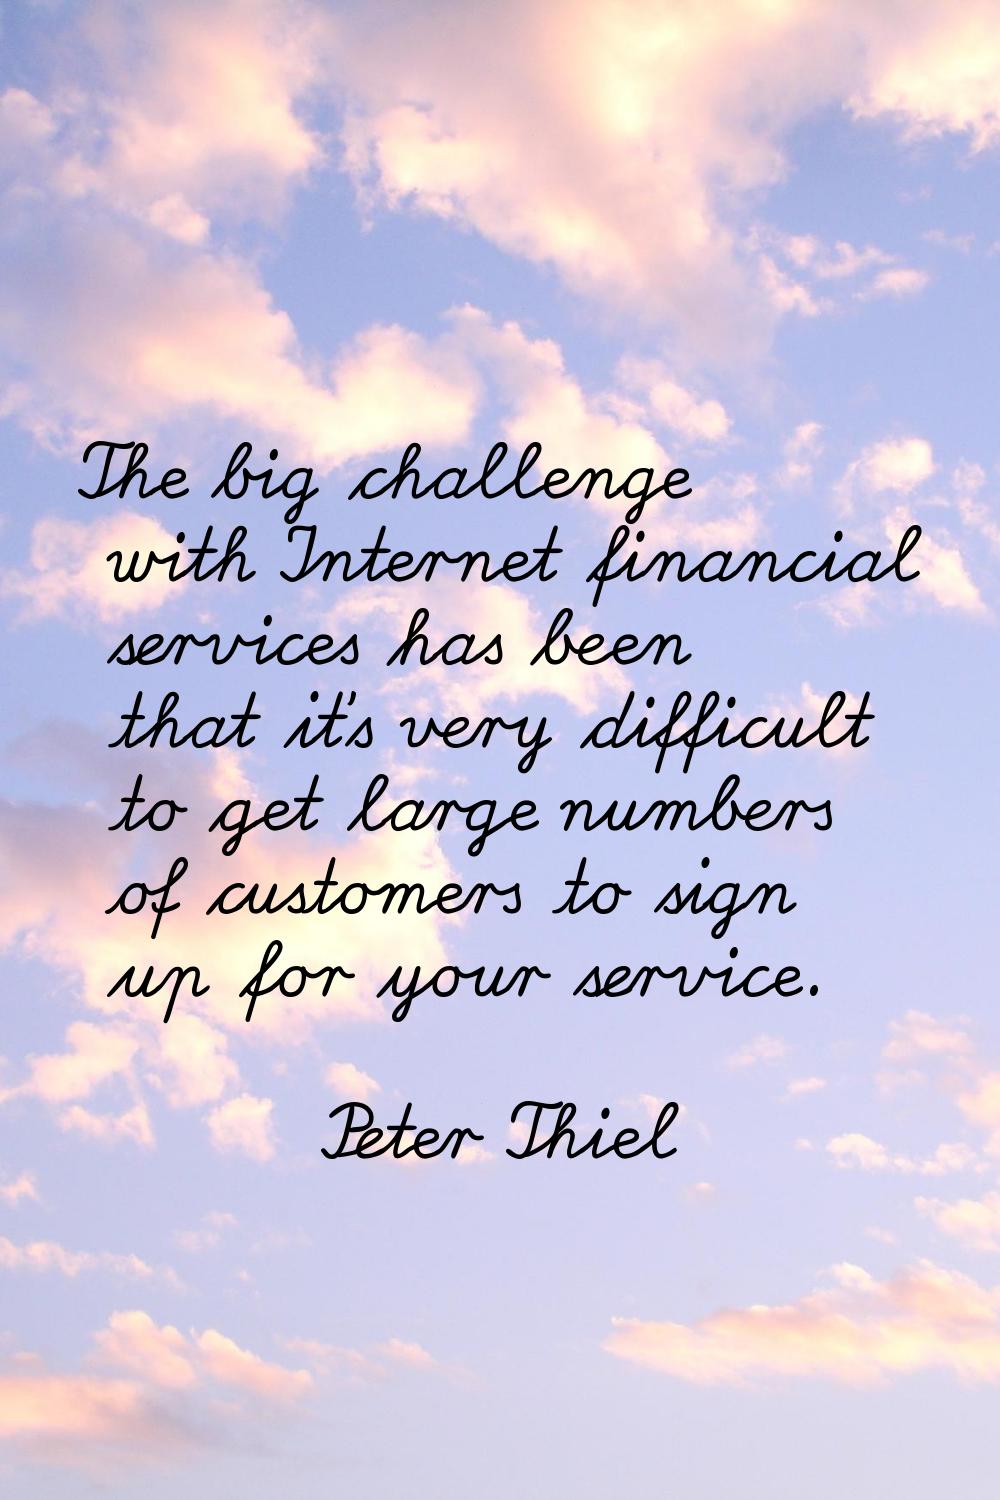 The big challenge with Internet financial services has been that it's very difficult to get large n